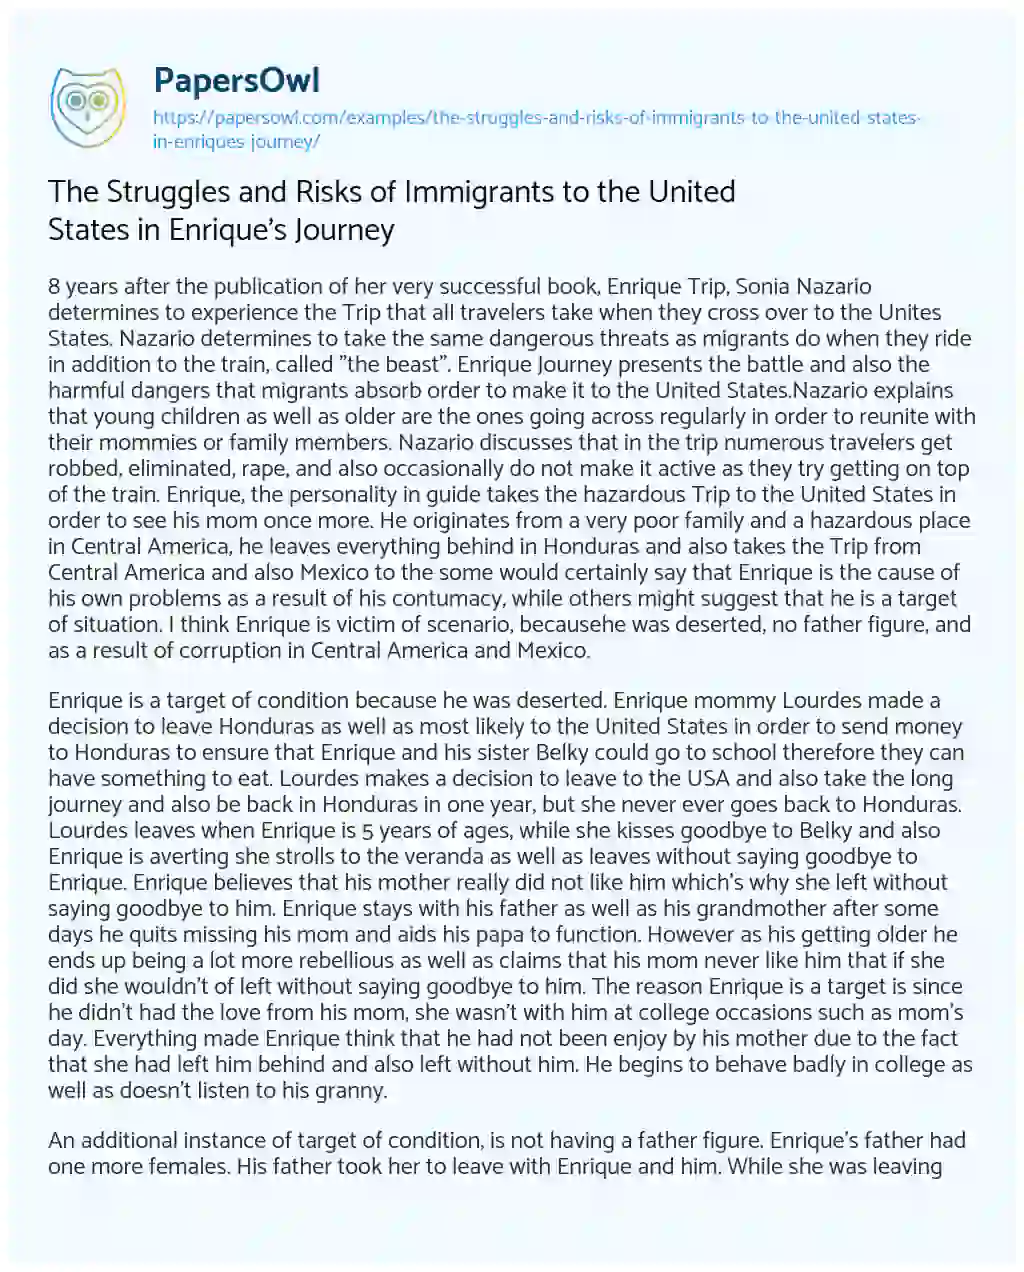 Essay on The Struggles and Risks of Immigrants to the United States in Enrique’s Journey